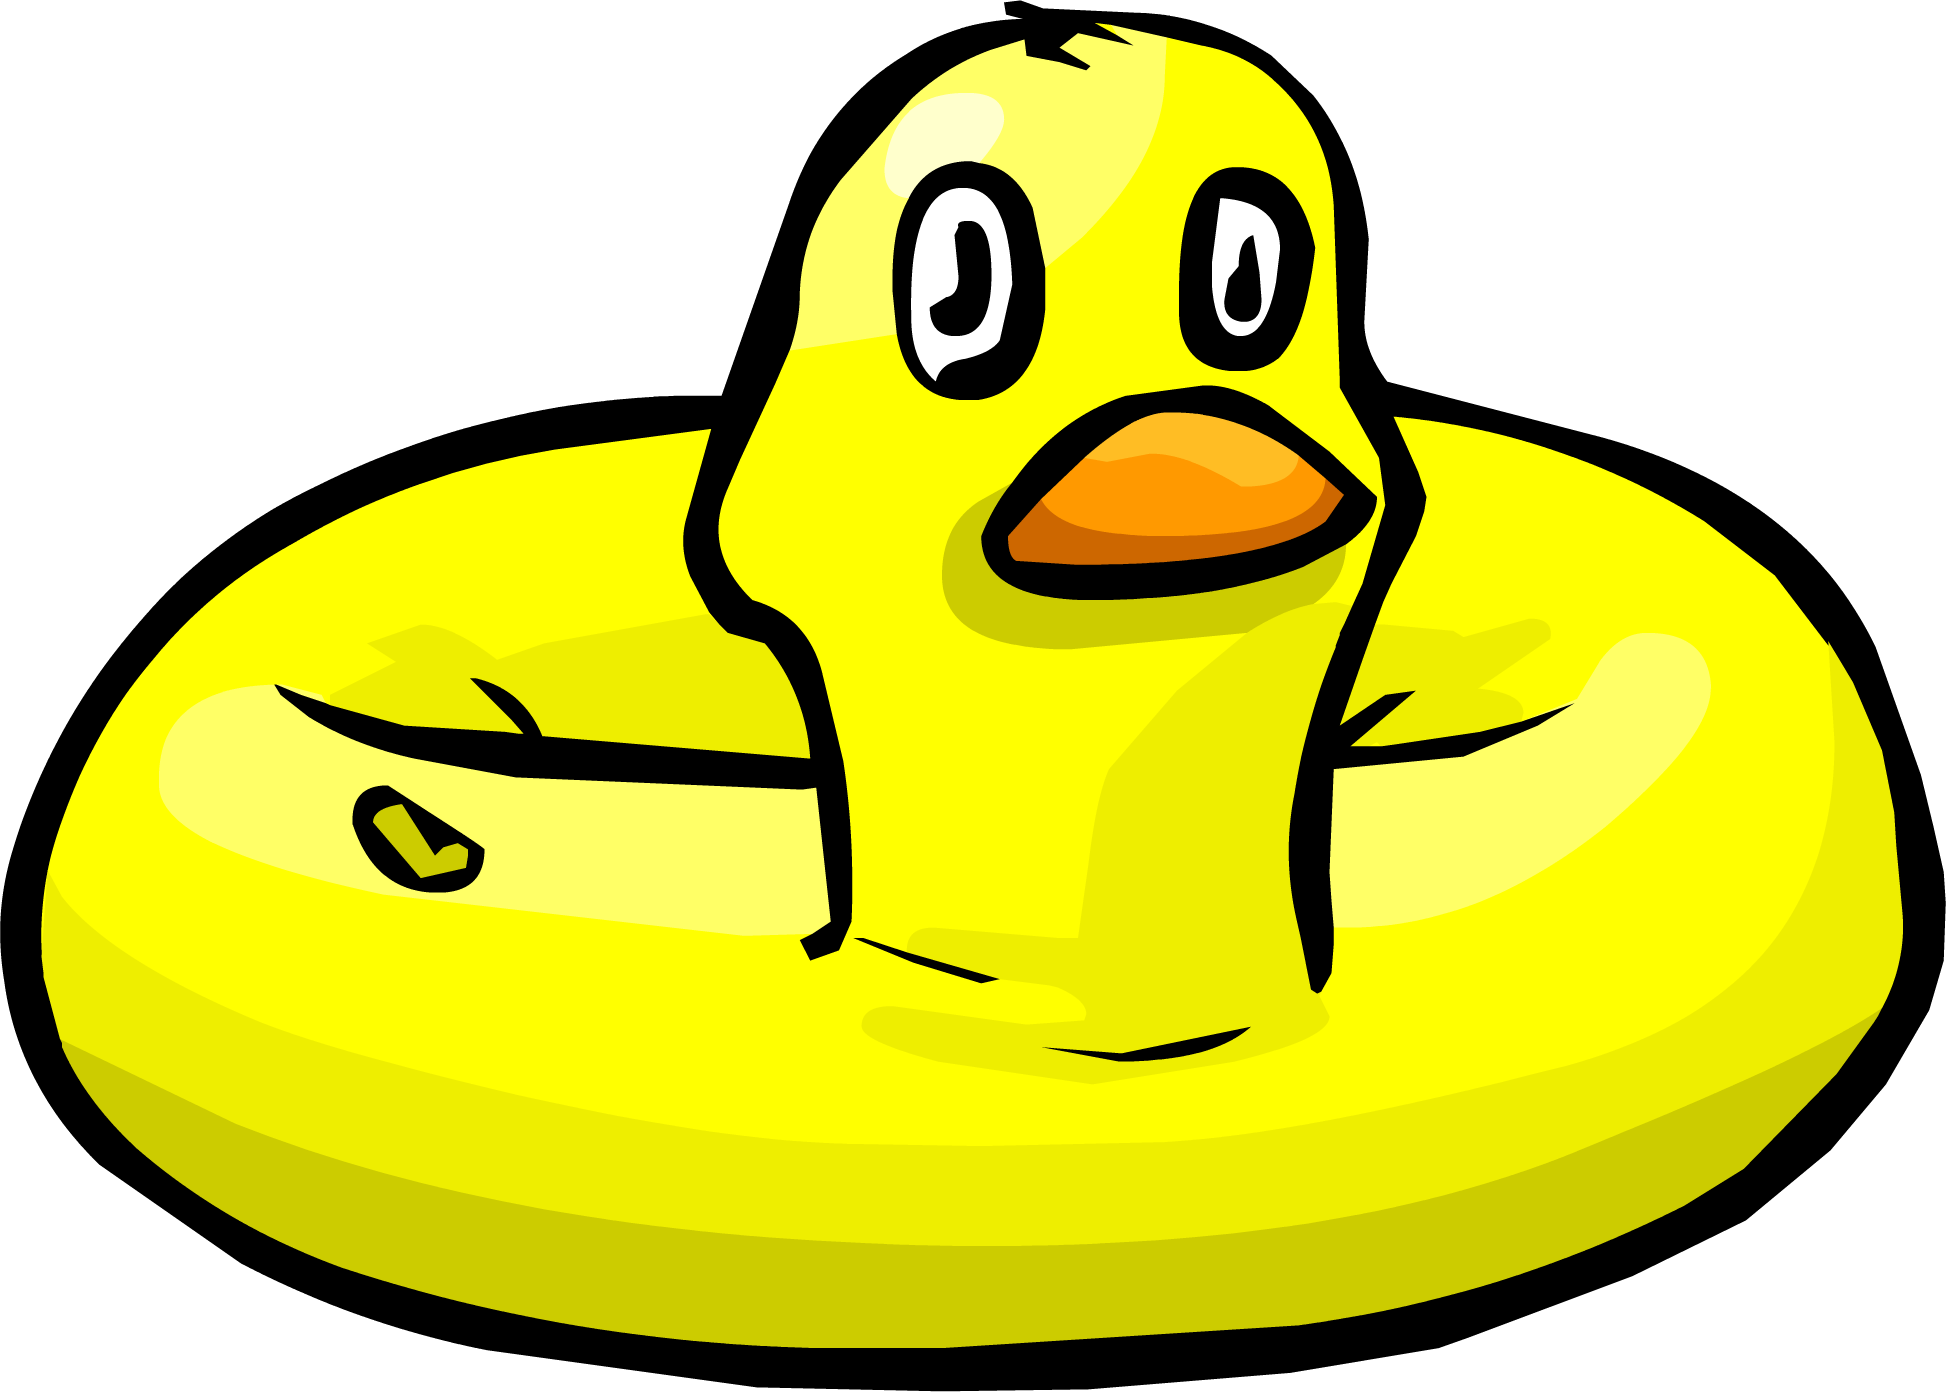 Inflatable duck club penguin. Duckling clipart yellow duckling